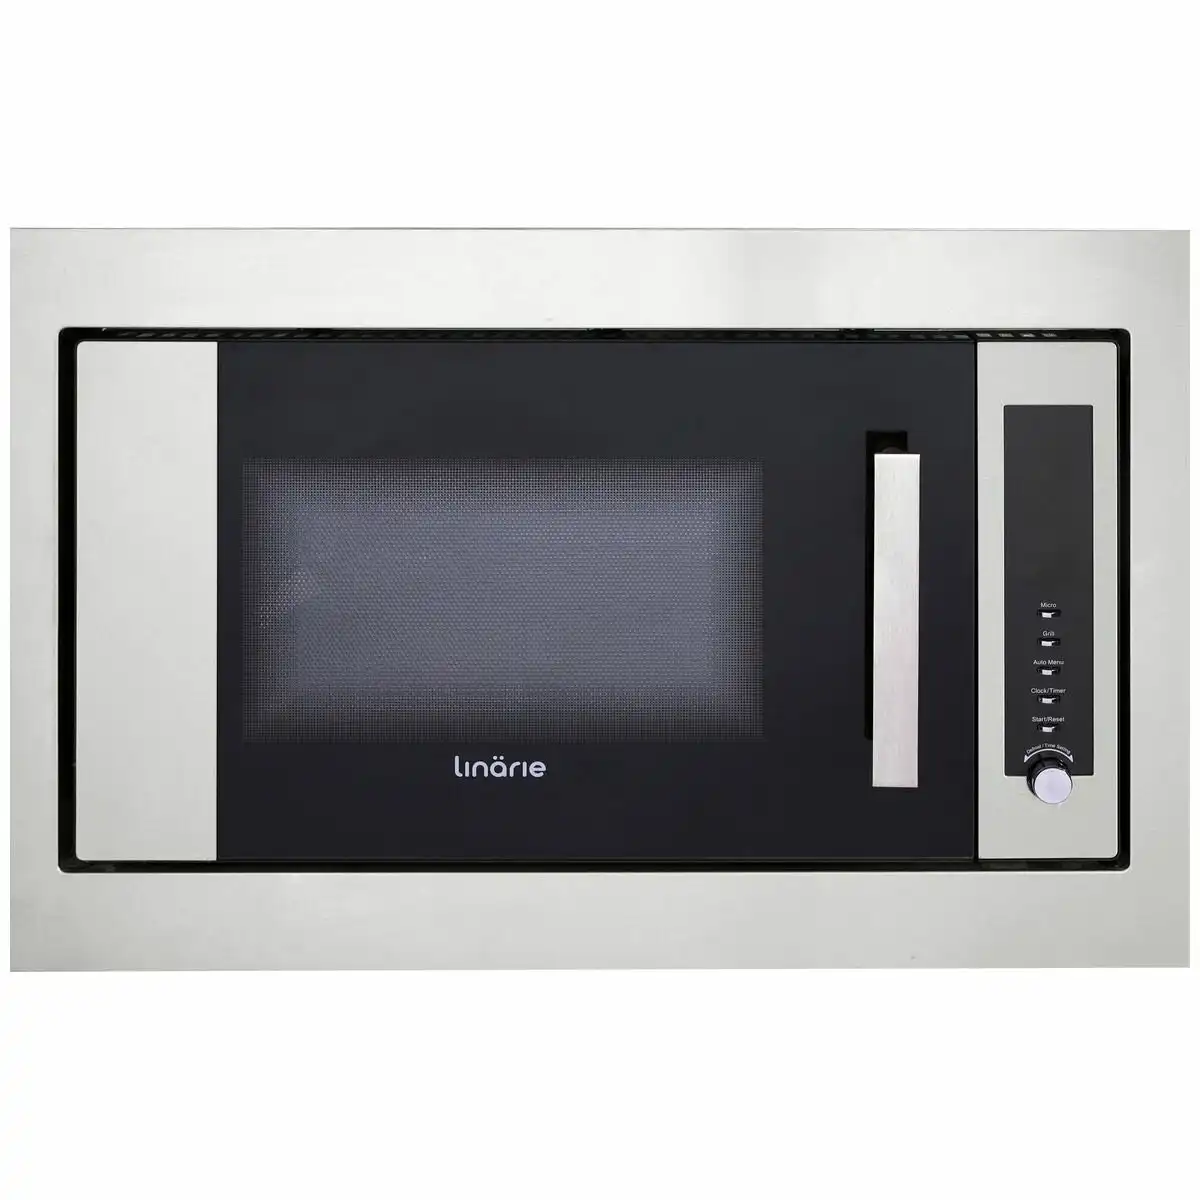 Linarie 30L Built In Microwave Oven/Grill with Trim Kit